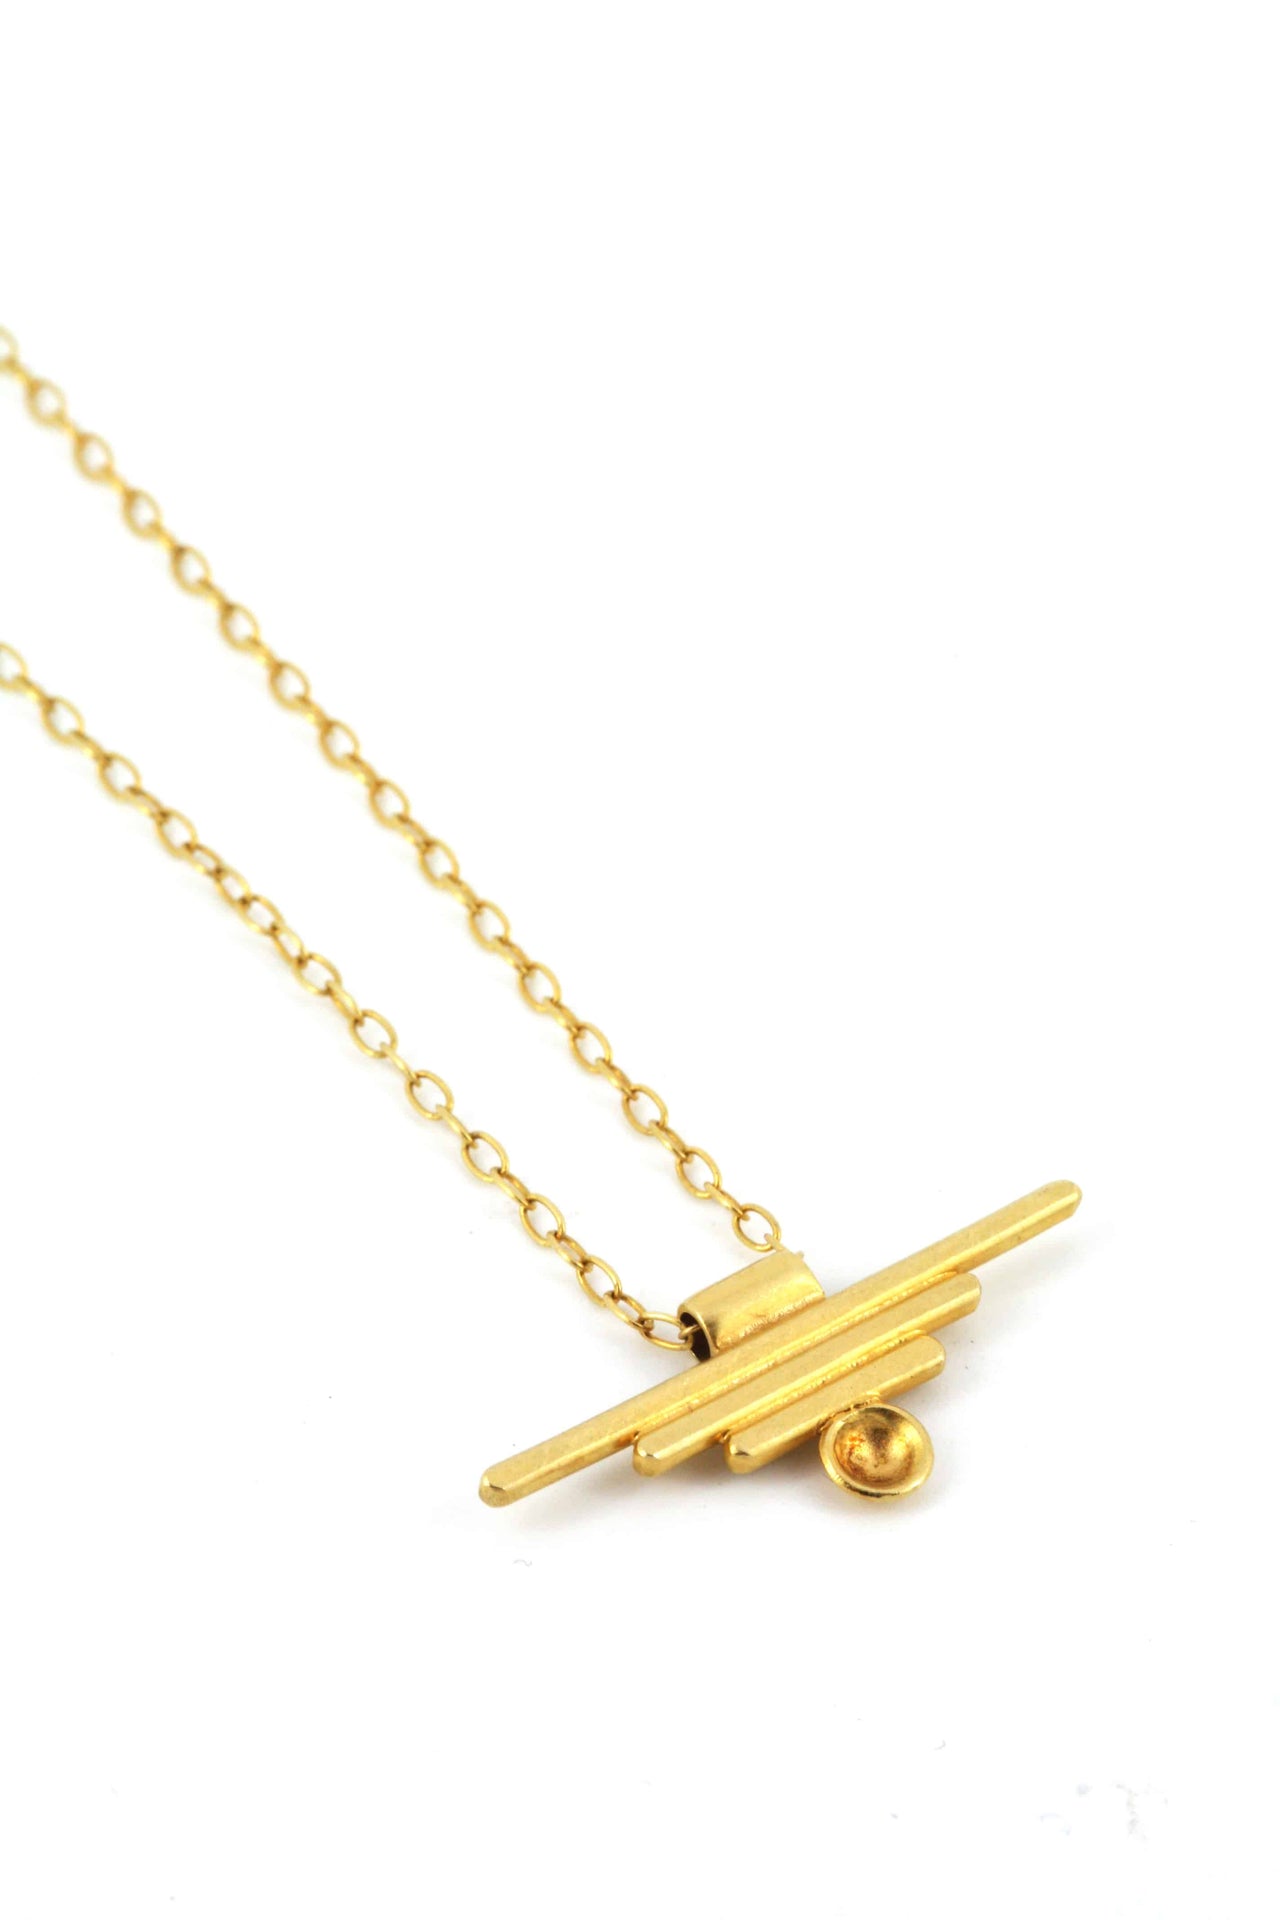 Tulum Necklace - Gold Plated